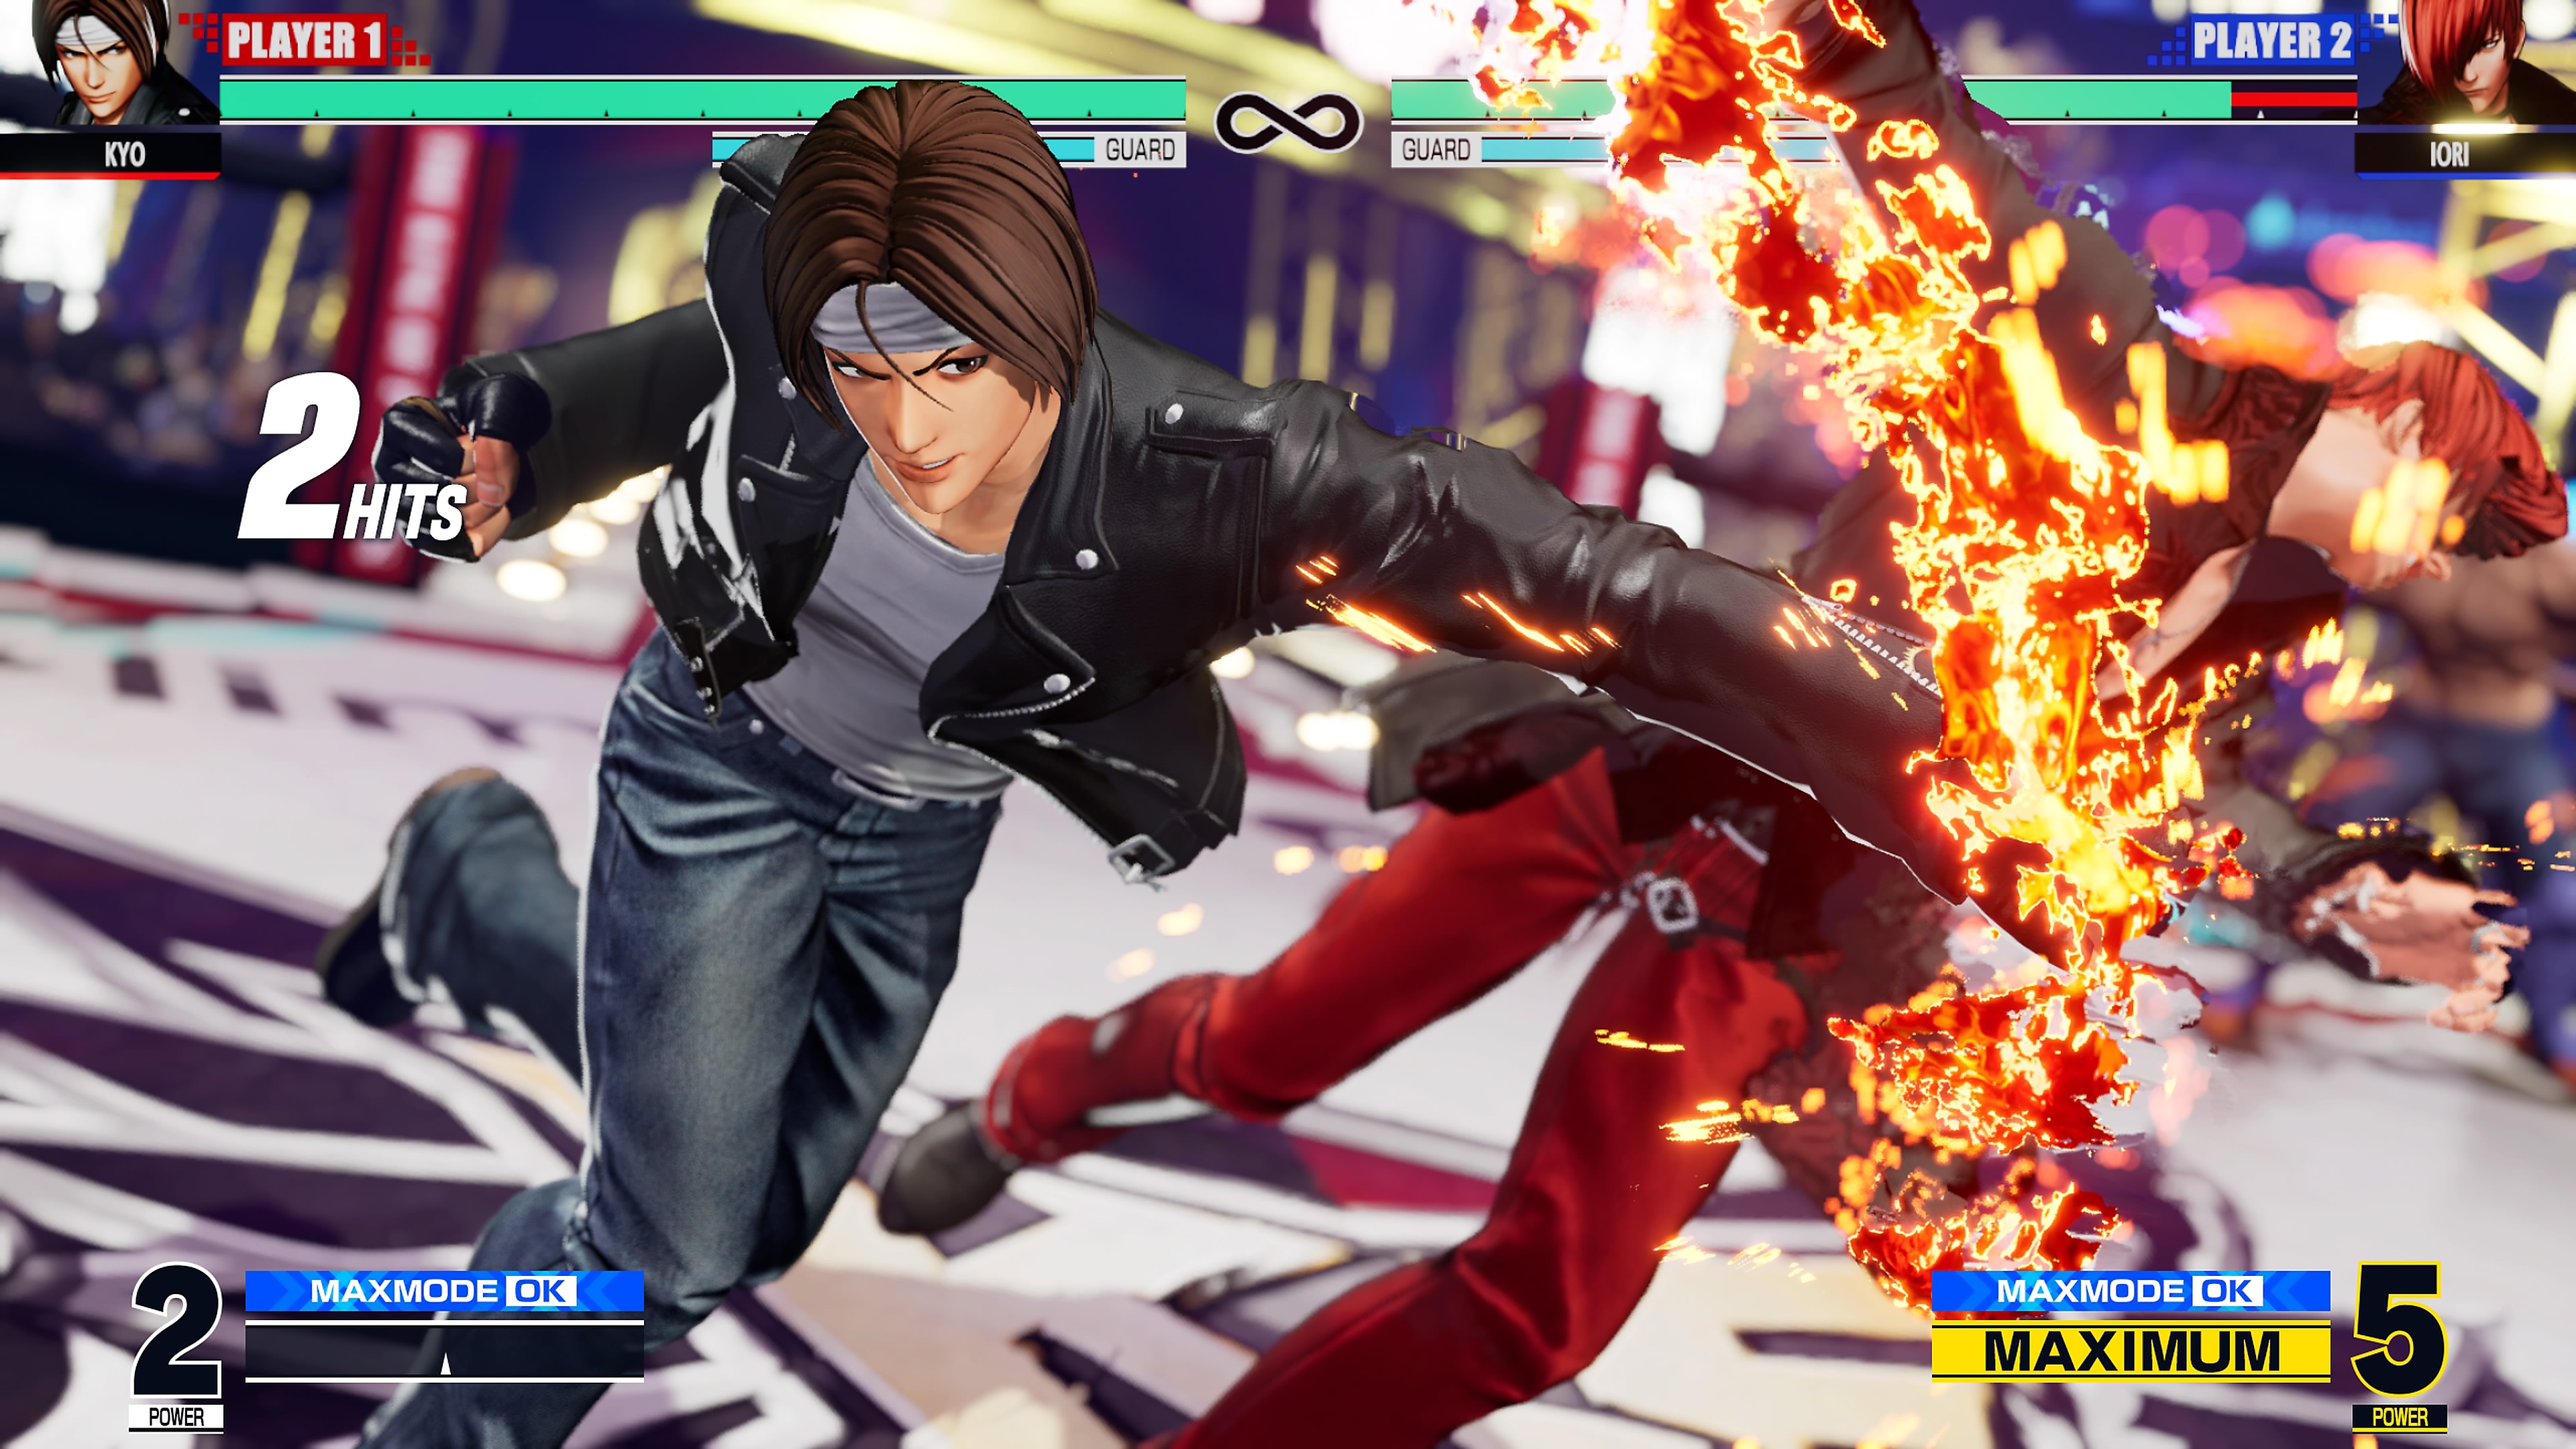 The King of Fighters XV - Gallery Screenshot 2